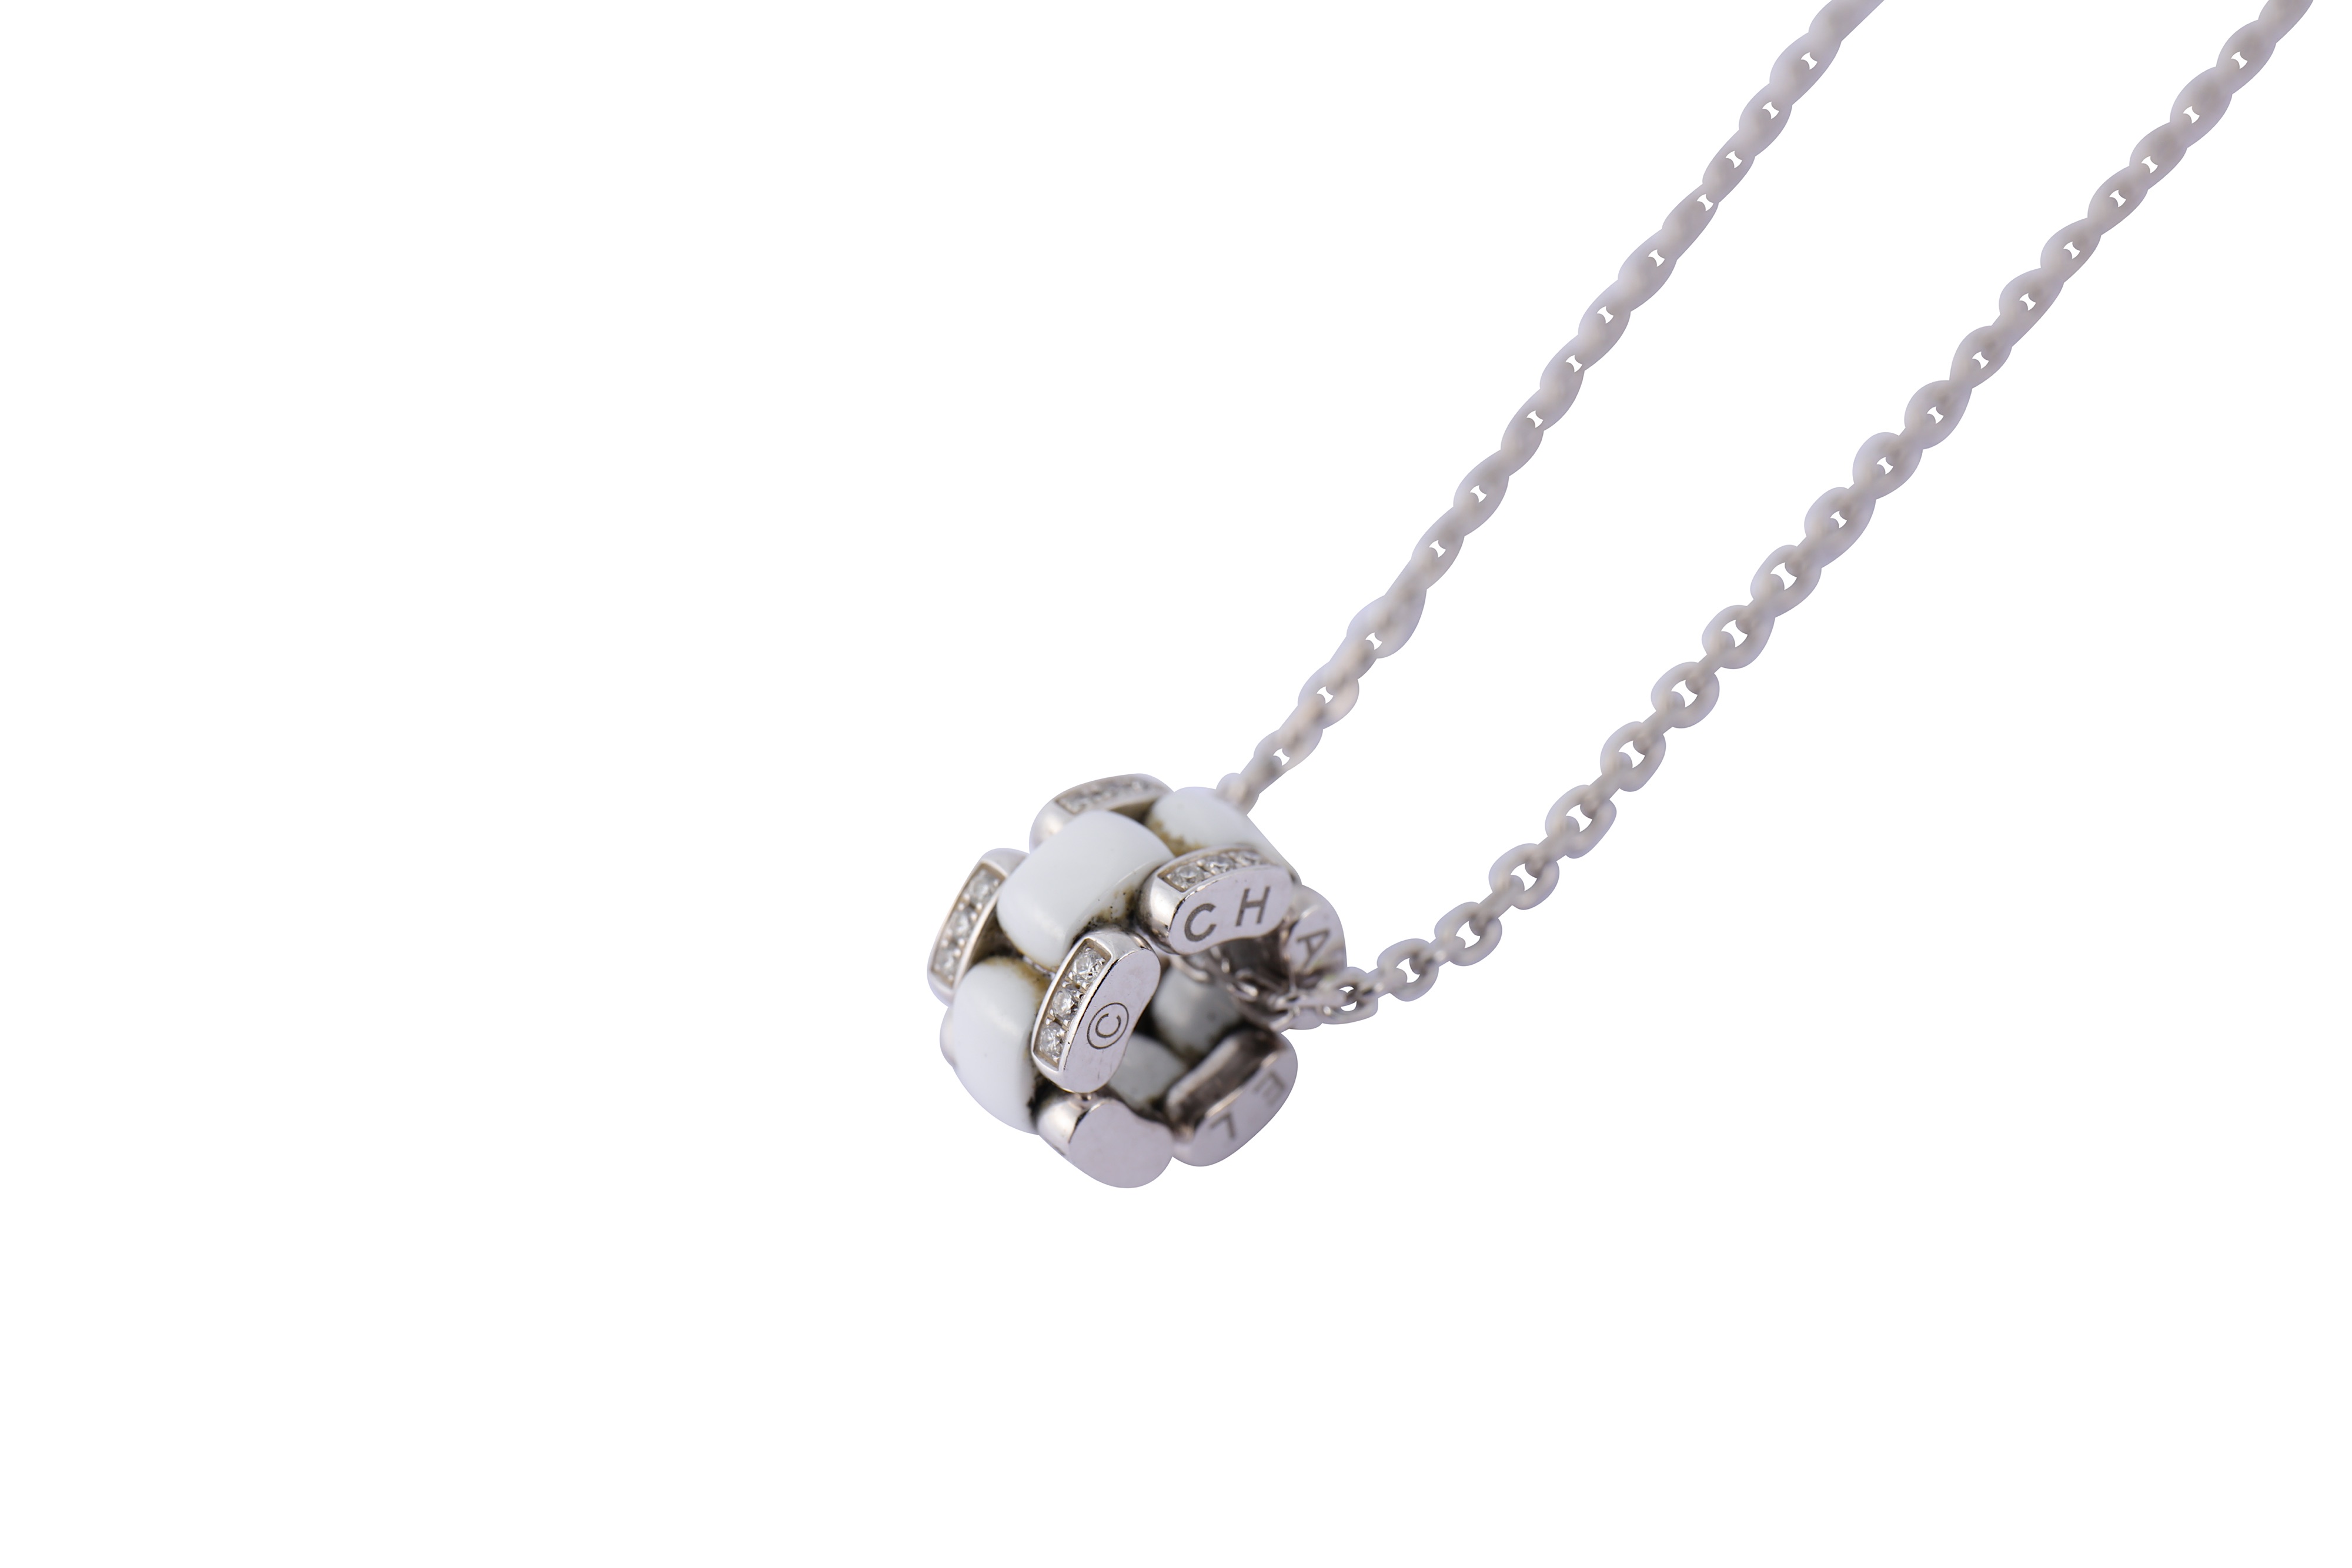 A ceramic and diamond 'Ultra' pendant necklace, by Chanel - Image 3 of 5